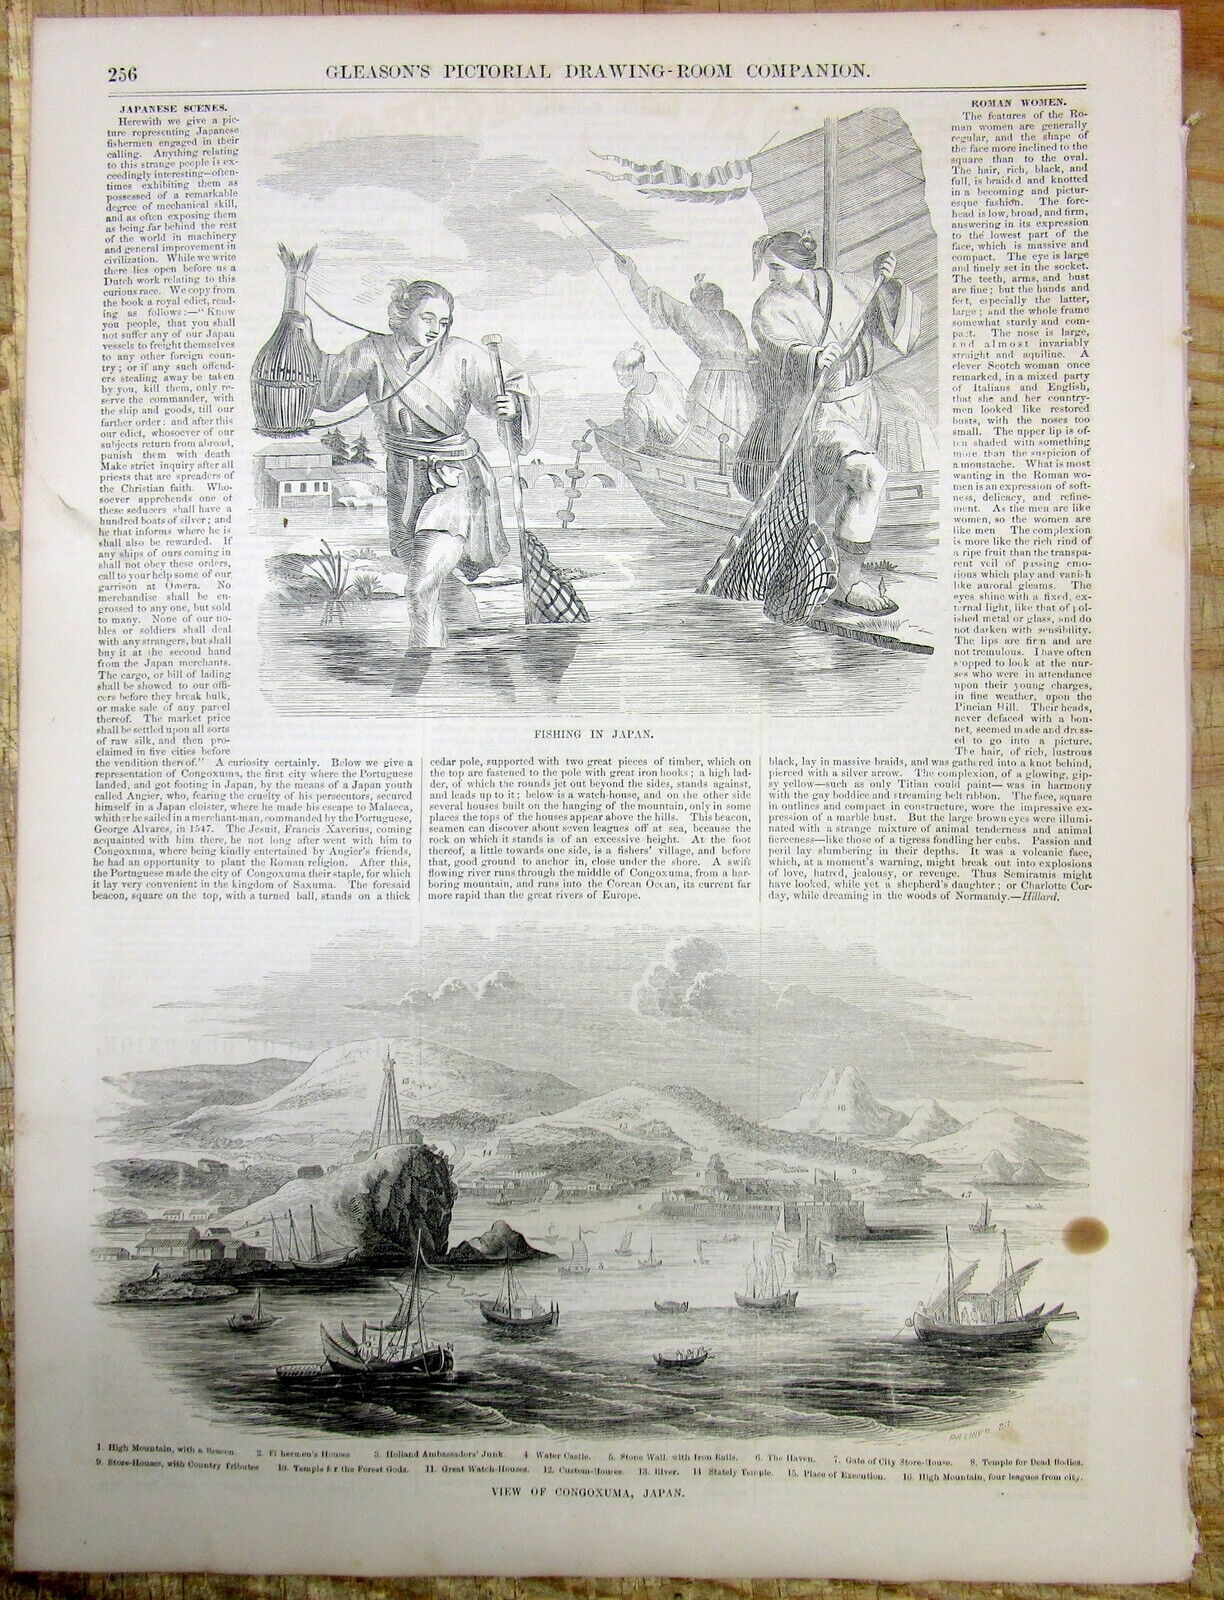 1853 illustrated newspaper with 2 early illustrated views & description of JAPAN